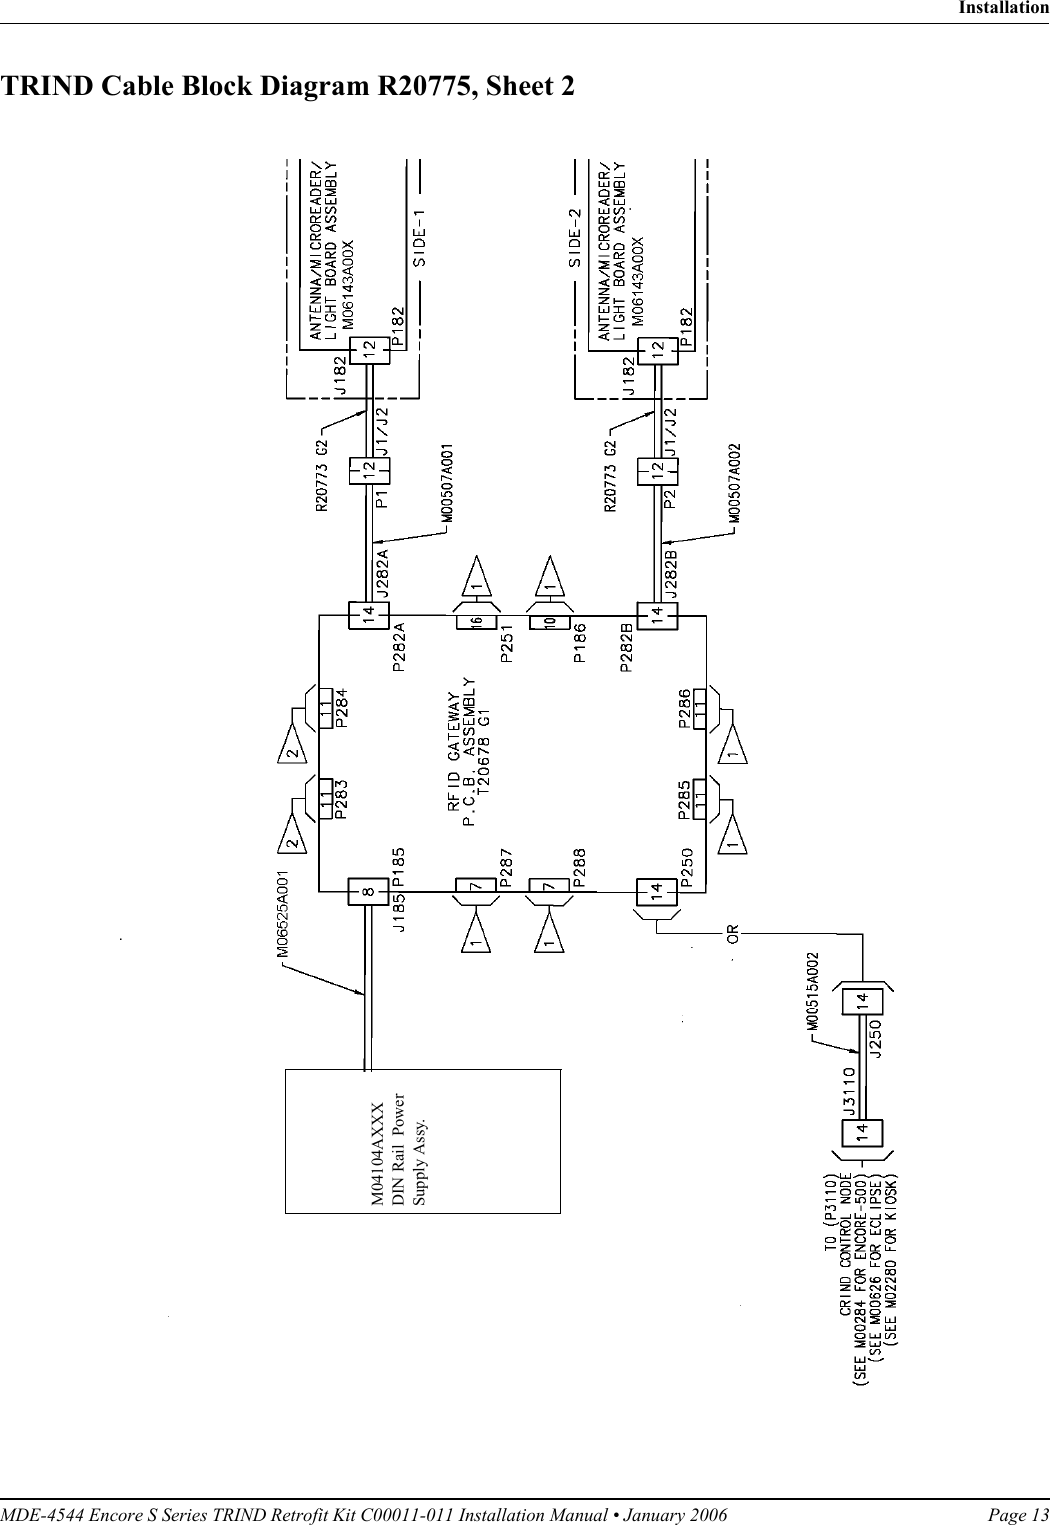 MDE-4544 Encore S Series TRIND Retrofit Kit C00011-011 Installation Manual • January 2006 Page 13InstallationDraftTRIND Cable Block Diagram R20775, Sheet 2 M04104AXXXDIN Rail  Power Supply Assy. 